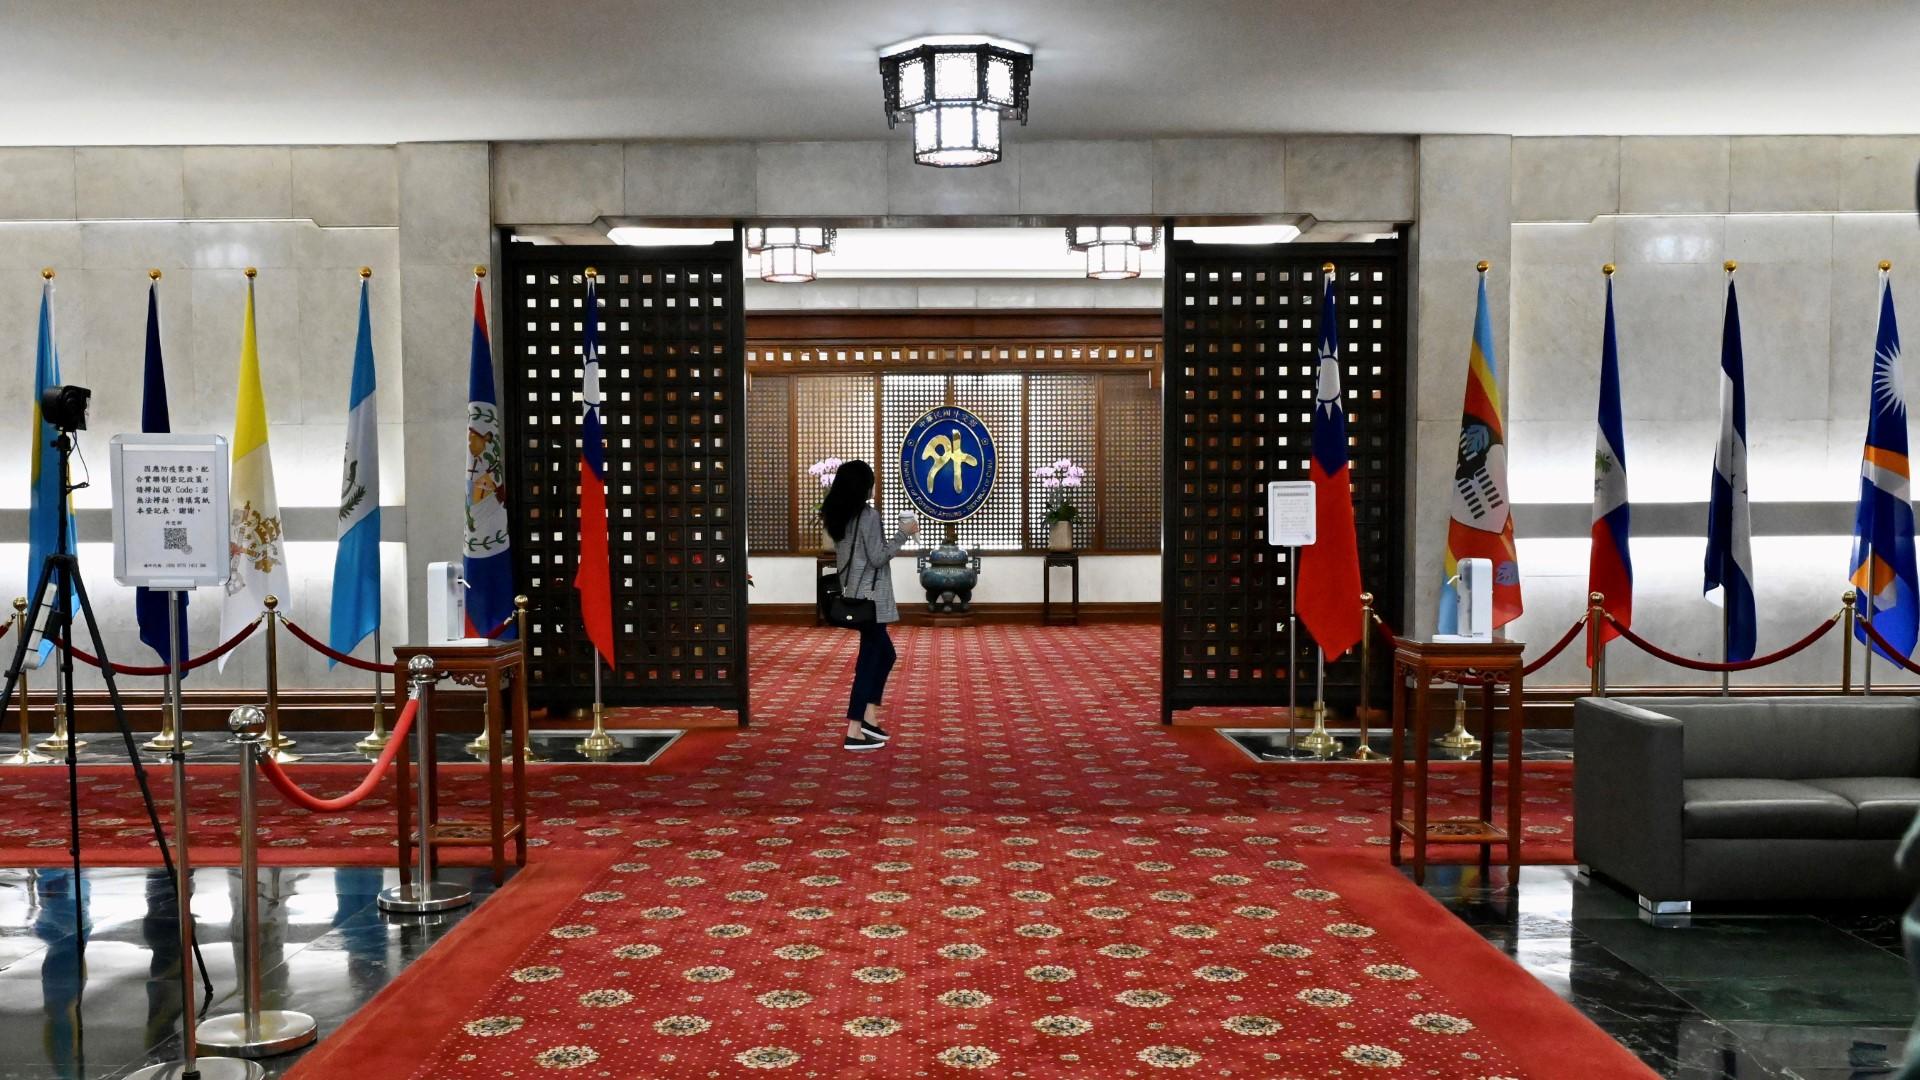 Flags of nations that recognise Taiwan are seen at the Ministry of Foreign Affairs building in Taipei on Dec 10, after Nicaragua switched diplomatic allegiance from Taiwan to China. Photo: AFP